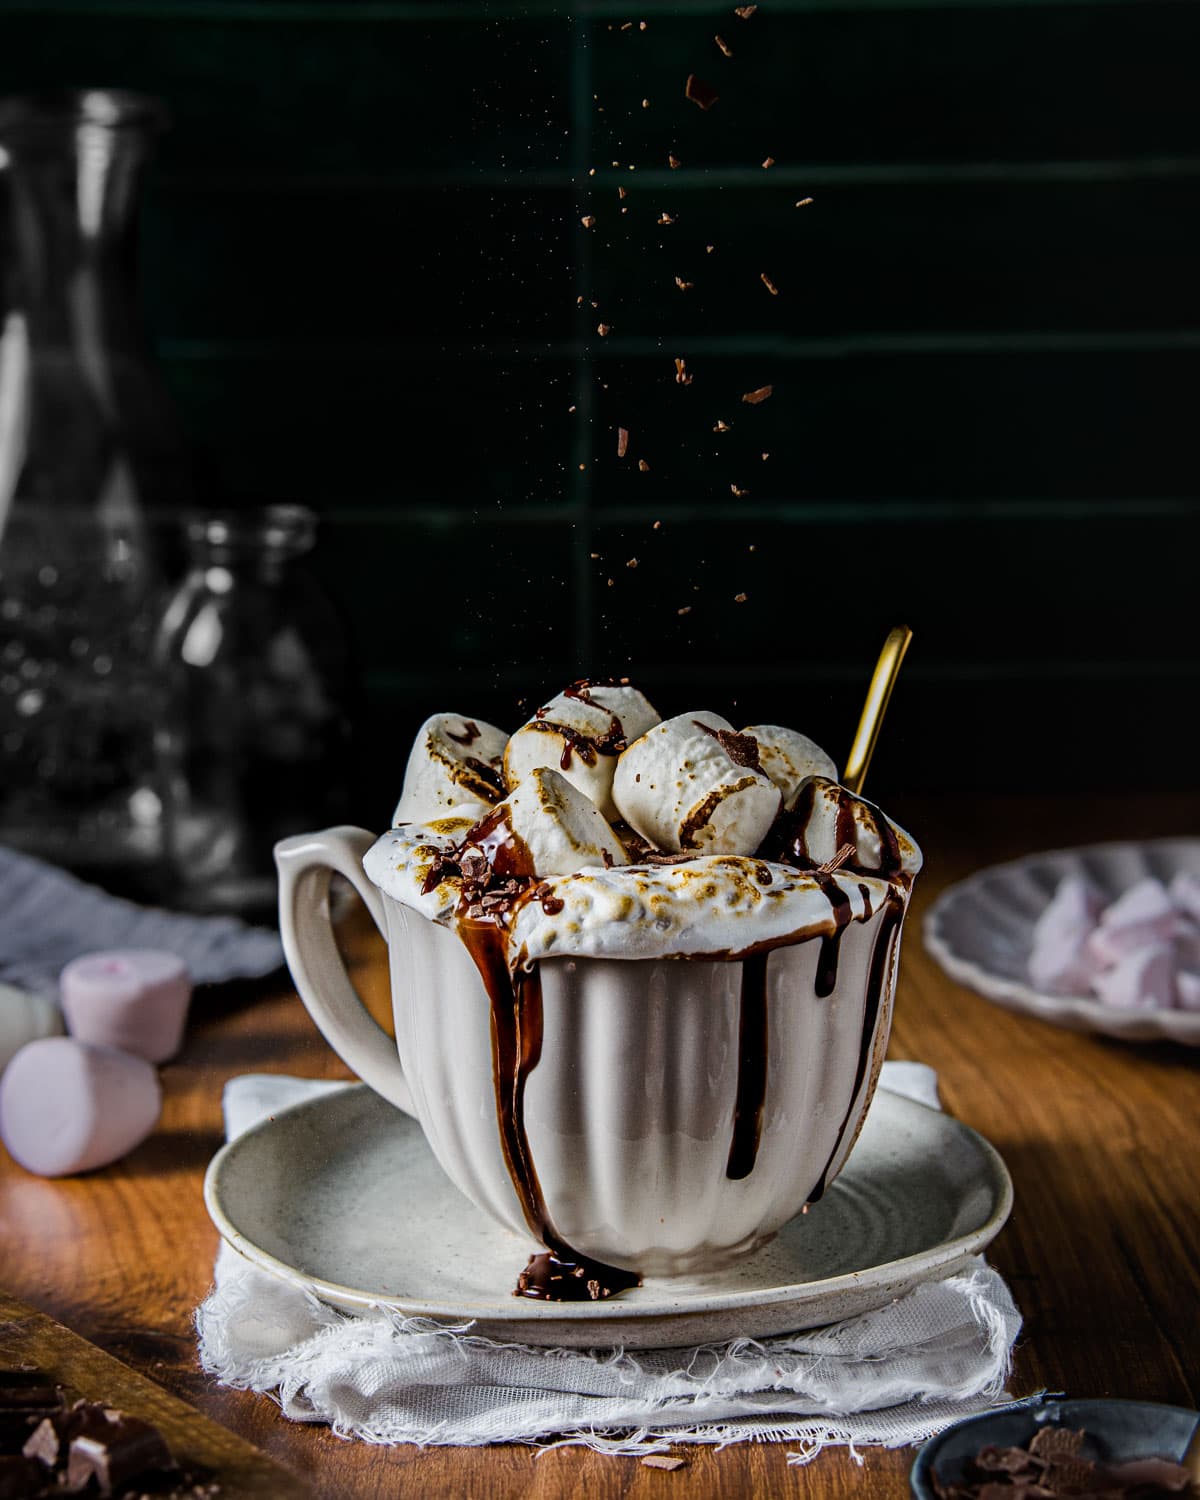 Chocolate sprinkles falling on a mug of marshmallow topped hot chocolate - Food Photography and Styling by Lou Carruthers, Crumbs and Corkscrews